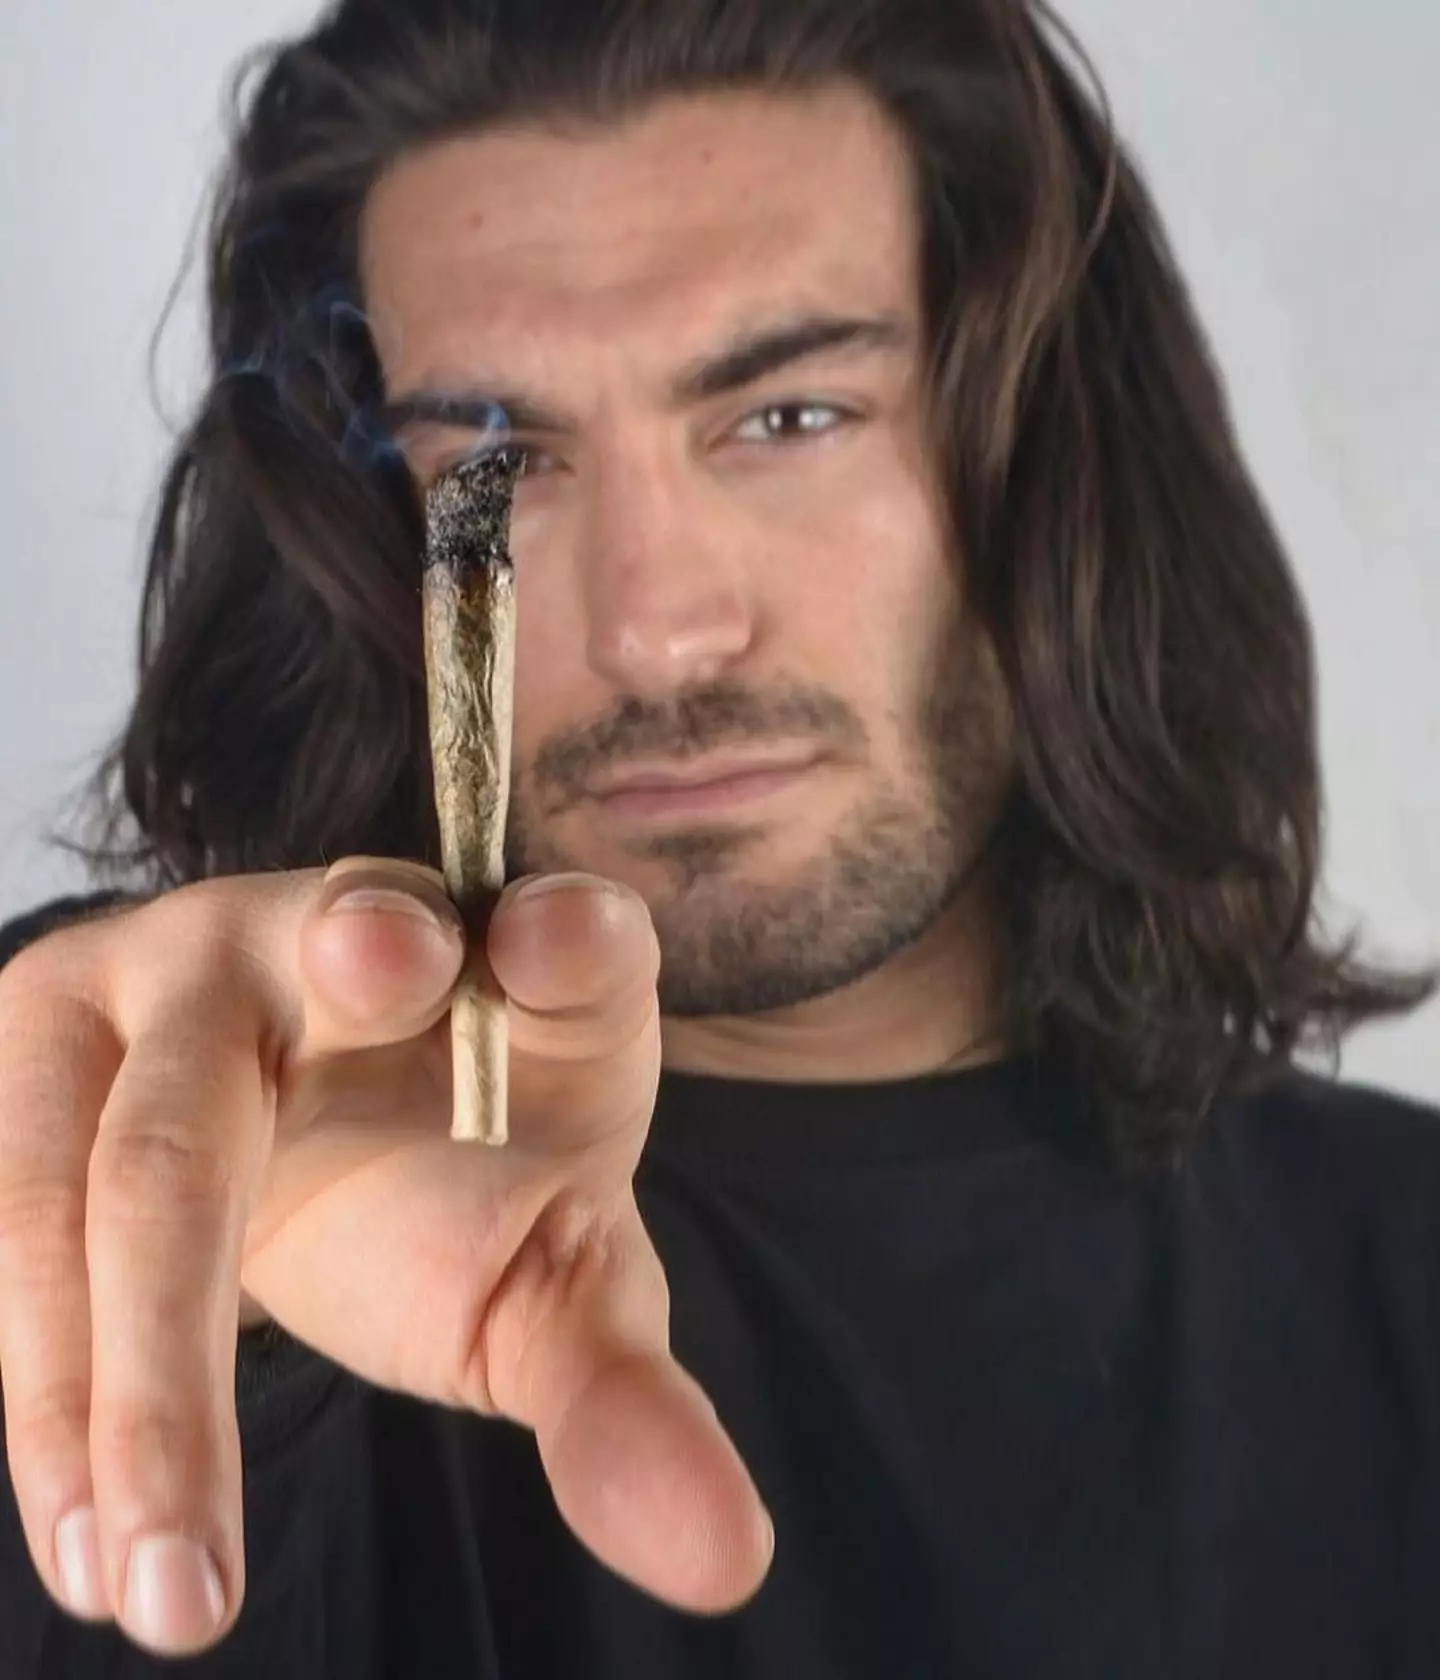 Theodorou was a vocal campaigner for the use of medical marijuana in sport.